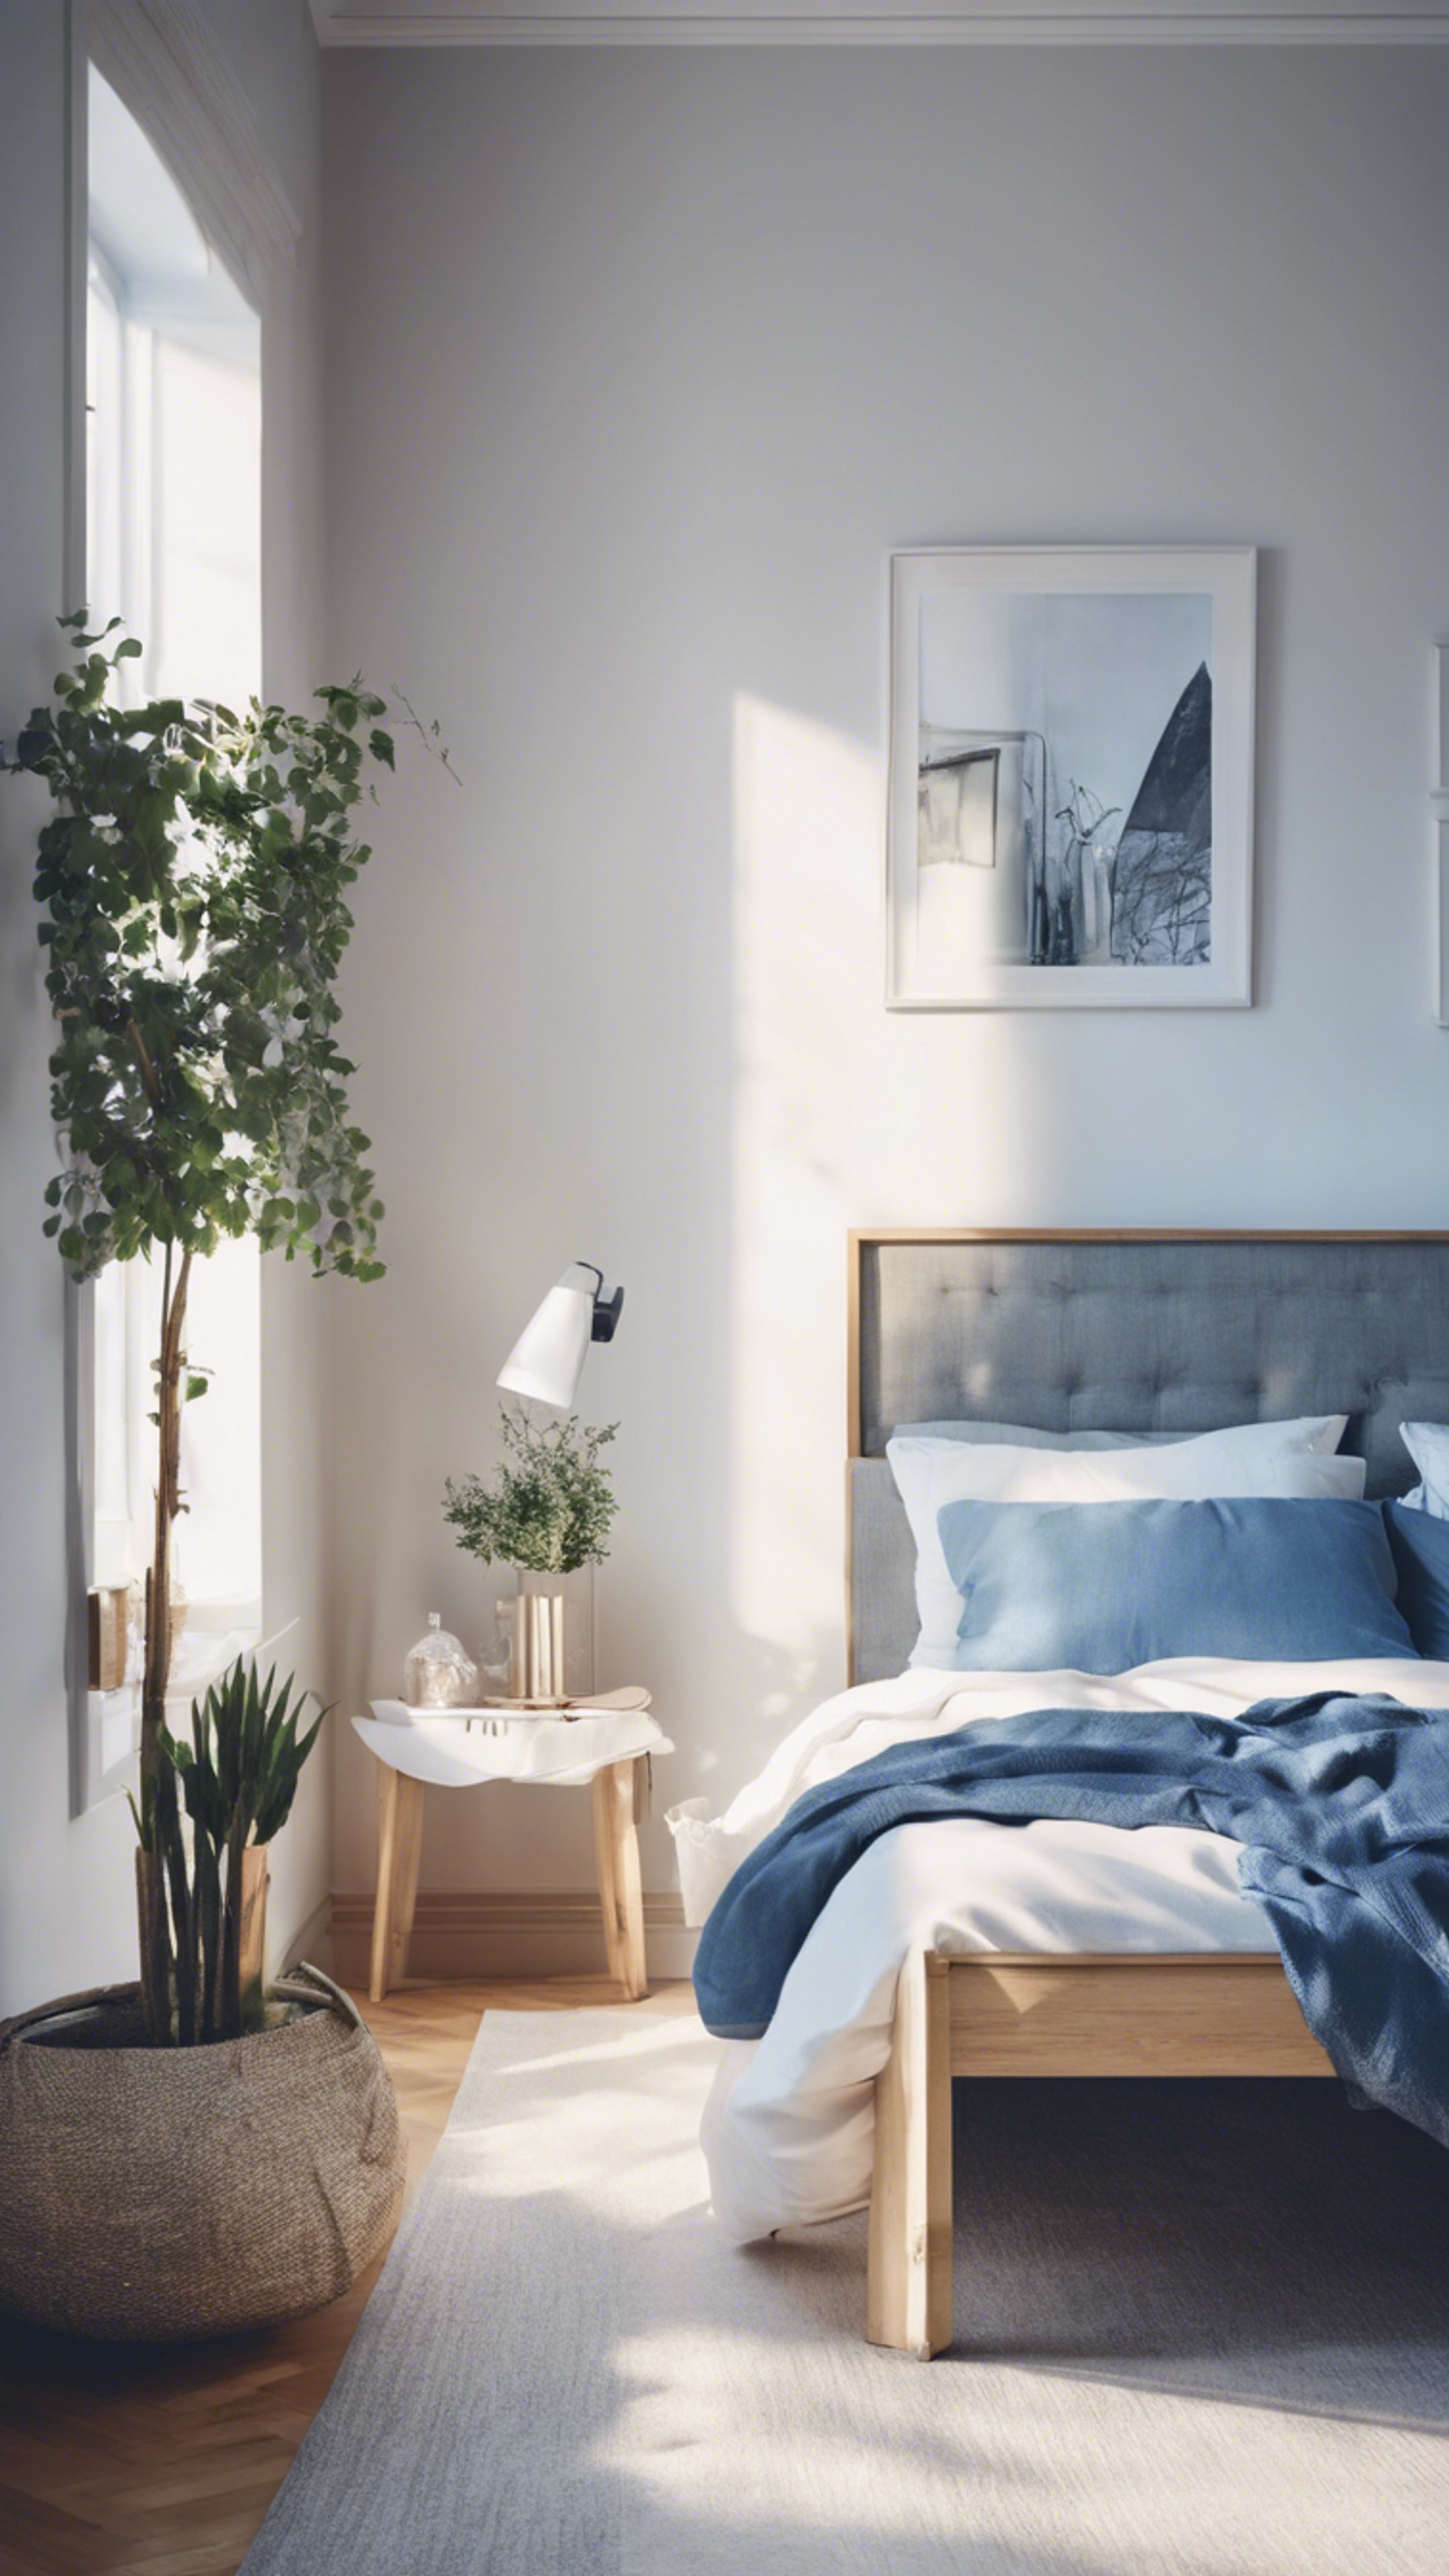 A Scandinavian style bedroom with white and blue minimalist decor bathed in morning sunlight. کاغذ دیواری[5ddcfeaf0e5340e39bc5]